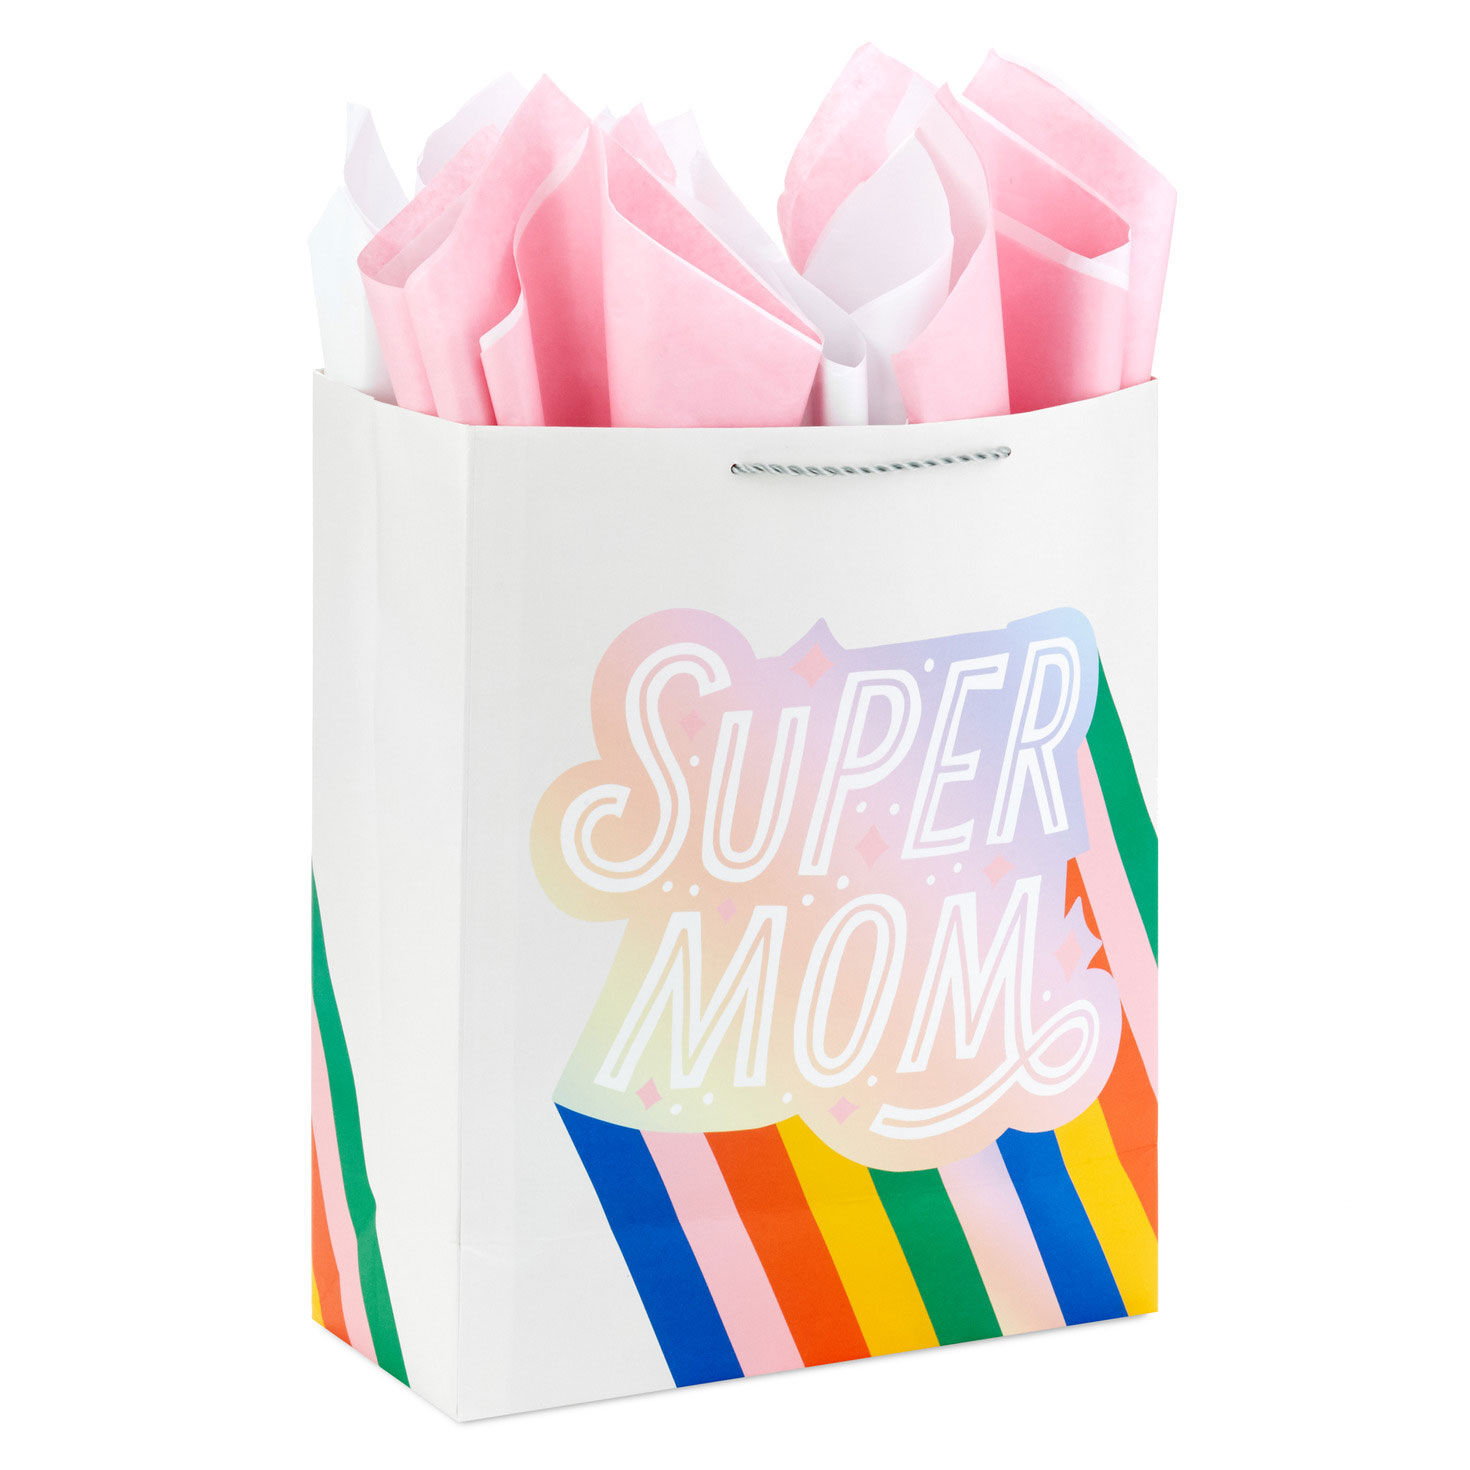 15.5" Super Mom Extra-Large Gift Bag With Tissue Paper for only USD 6.99 | Hallmark